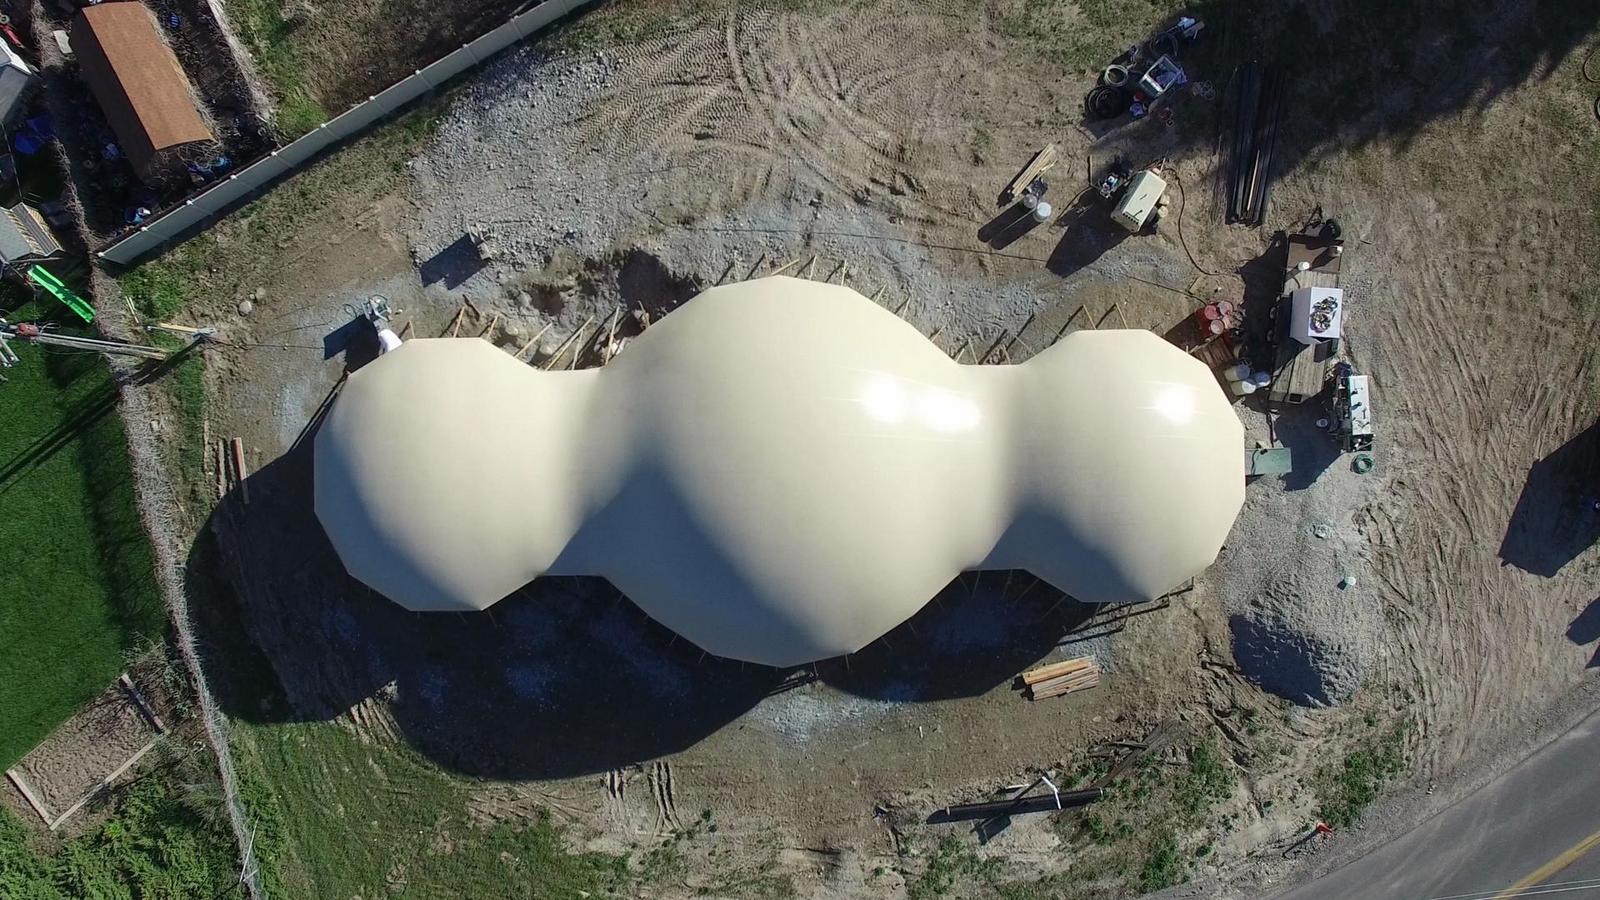 Birdseye view of the inflated Airform membrane.